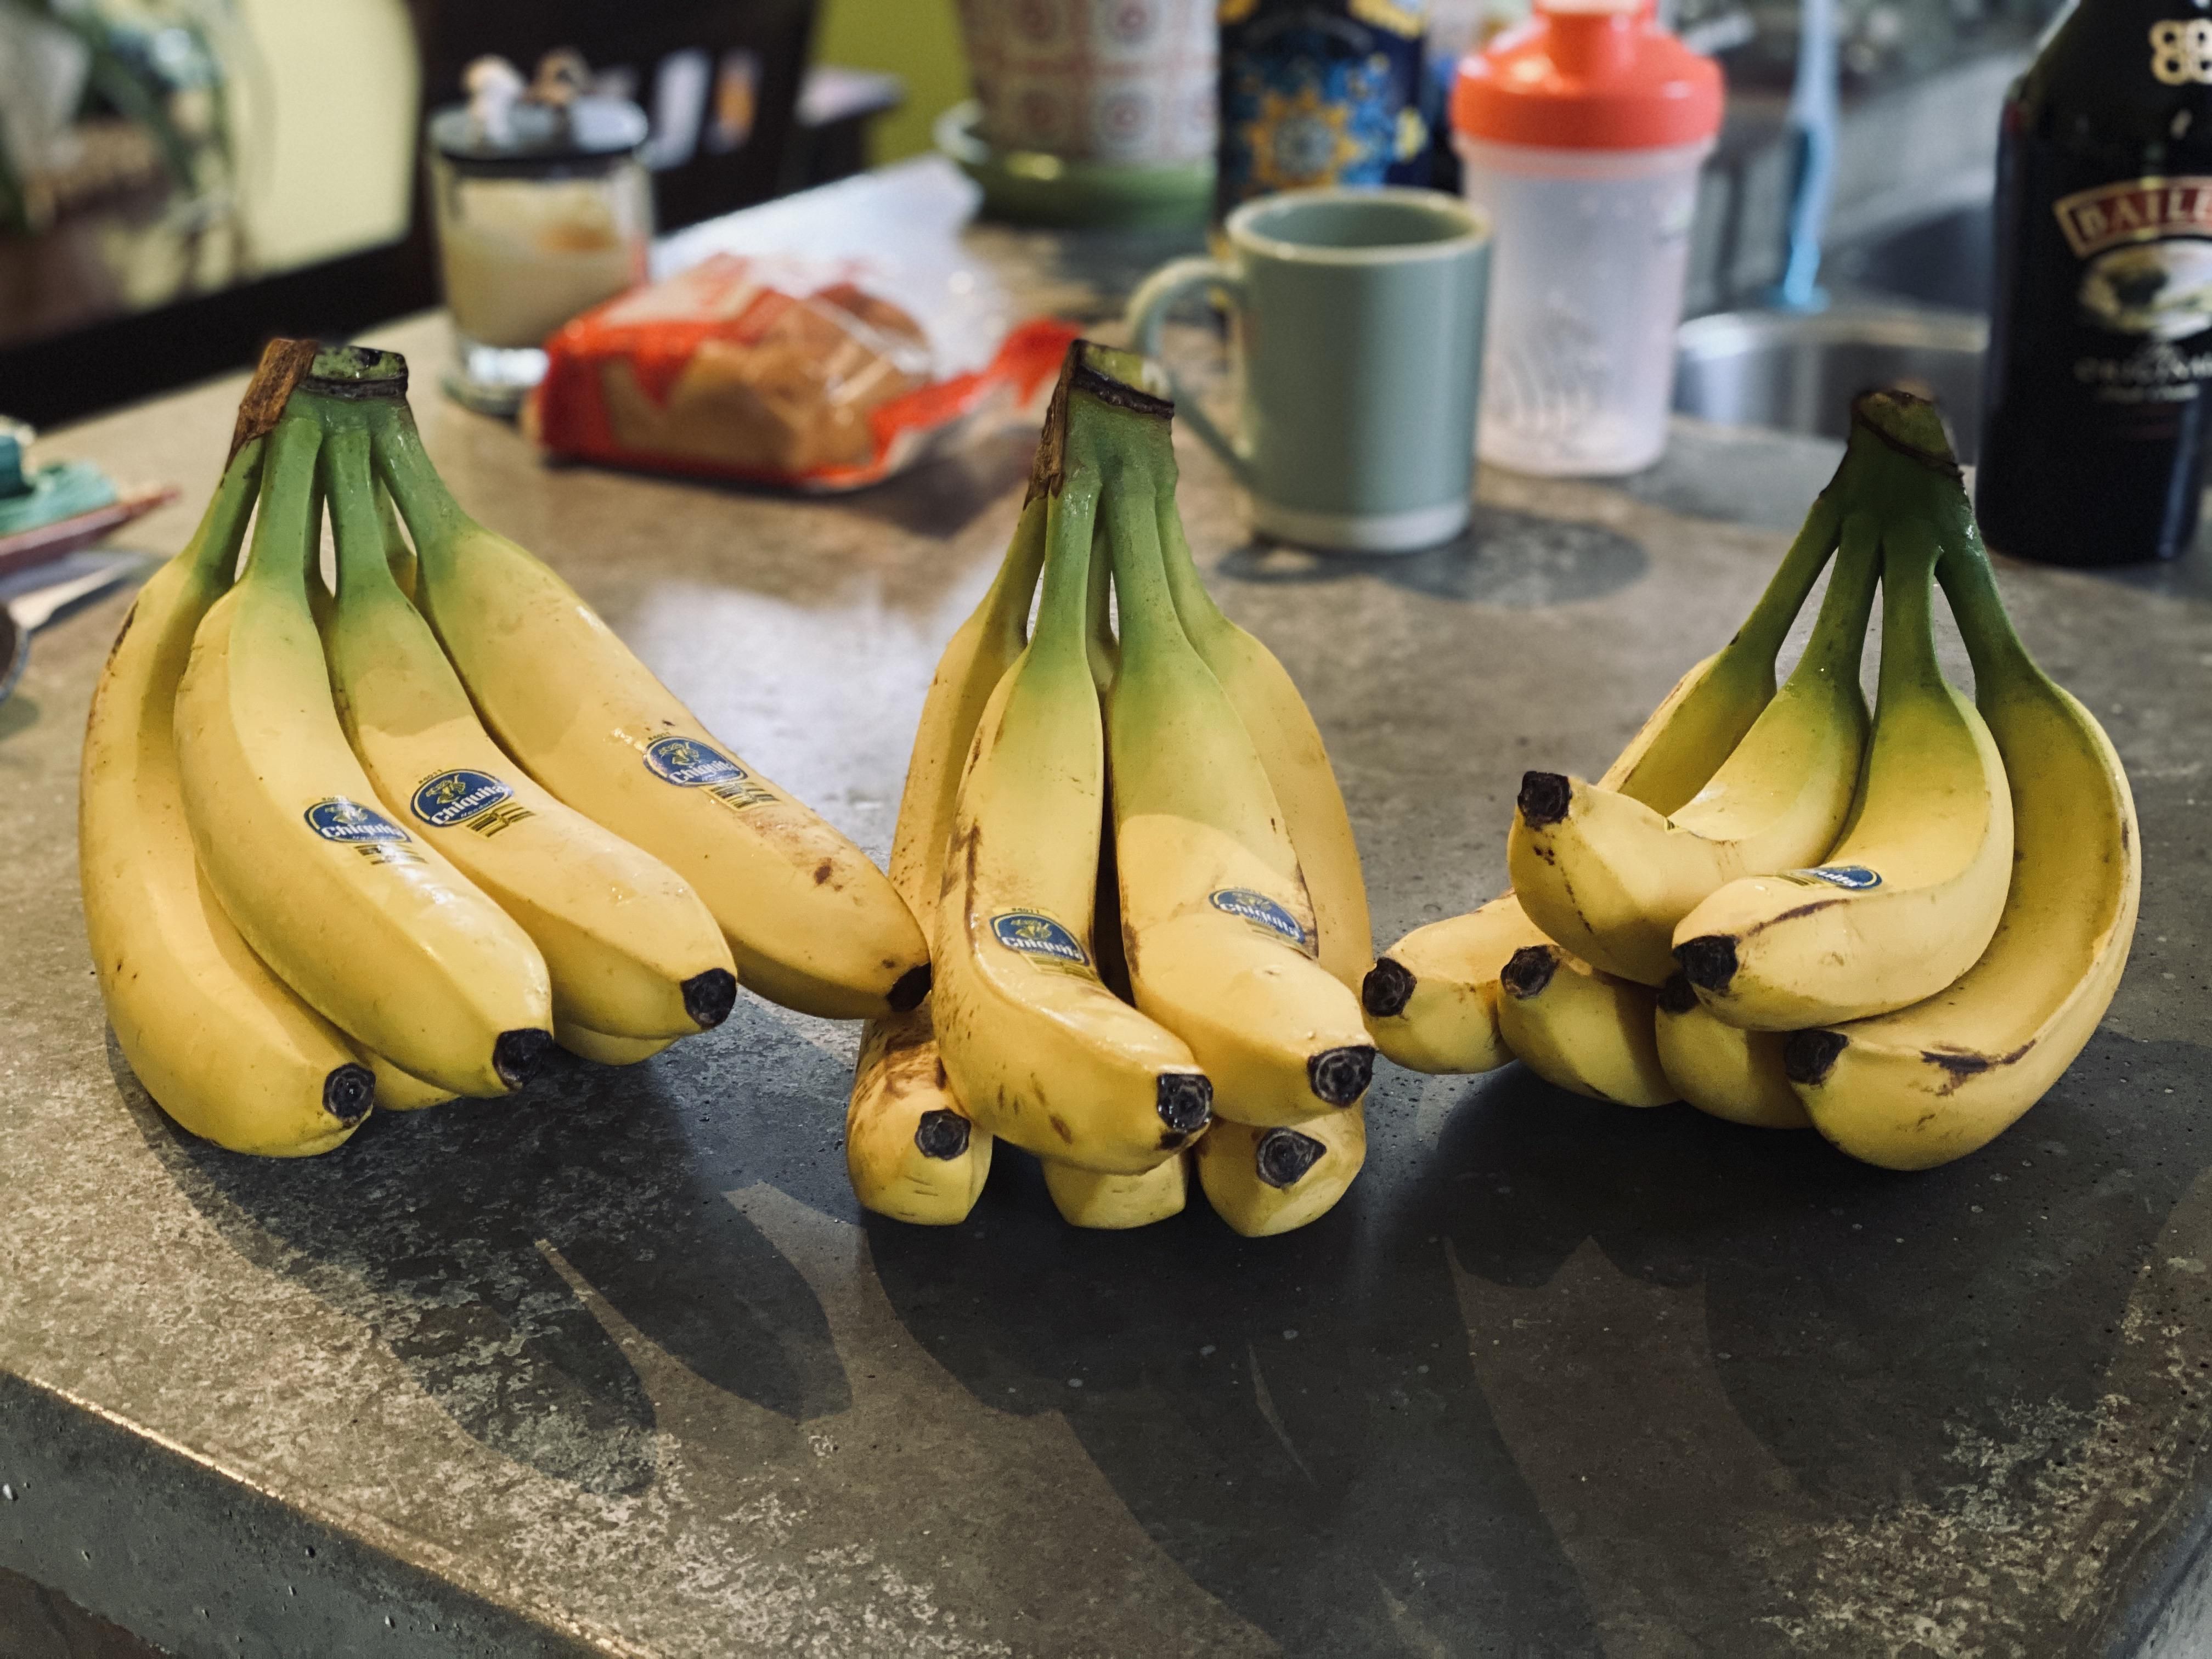 Never ordered groceries to be delivered. I just wanted three bananas.